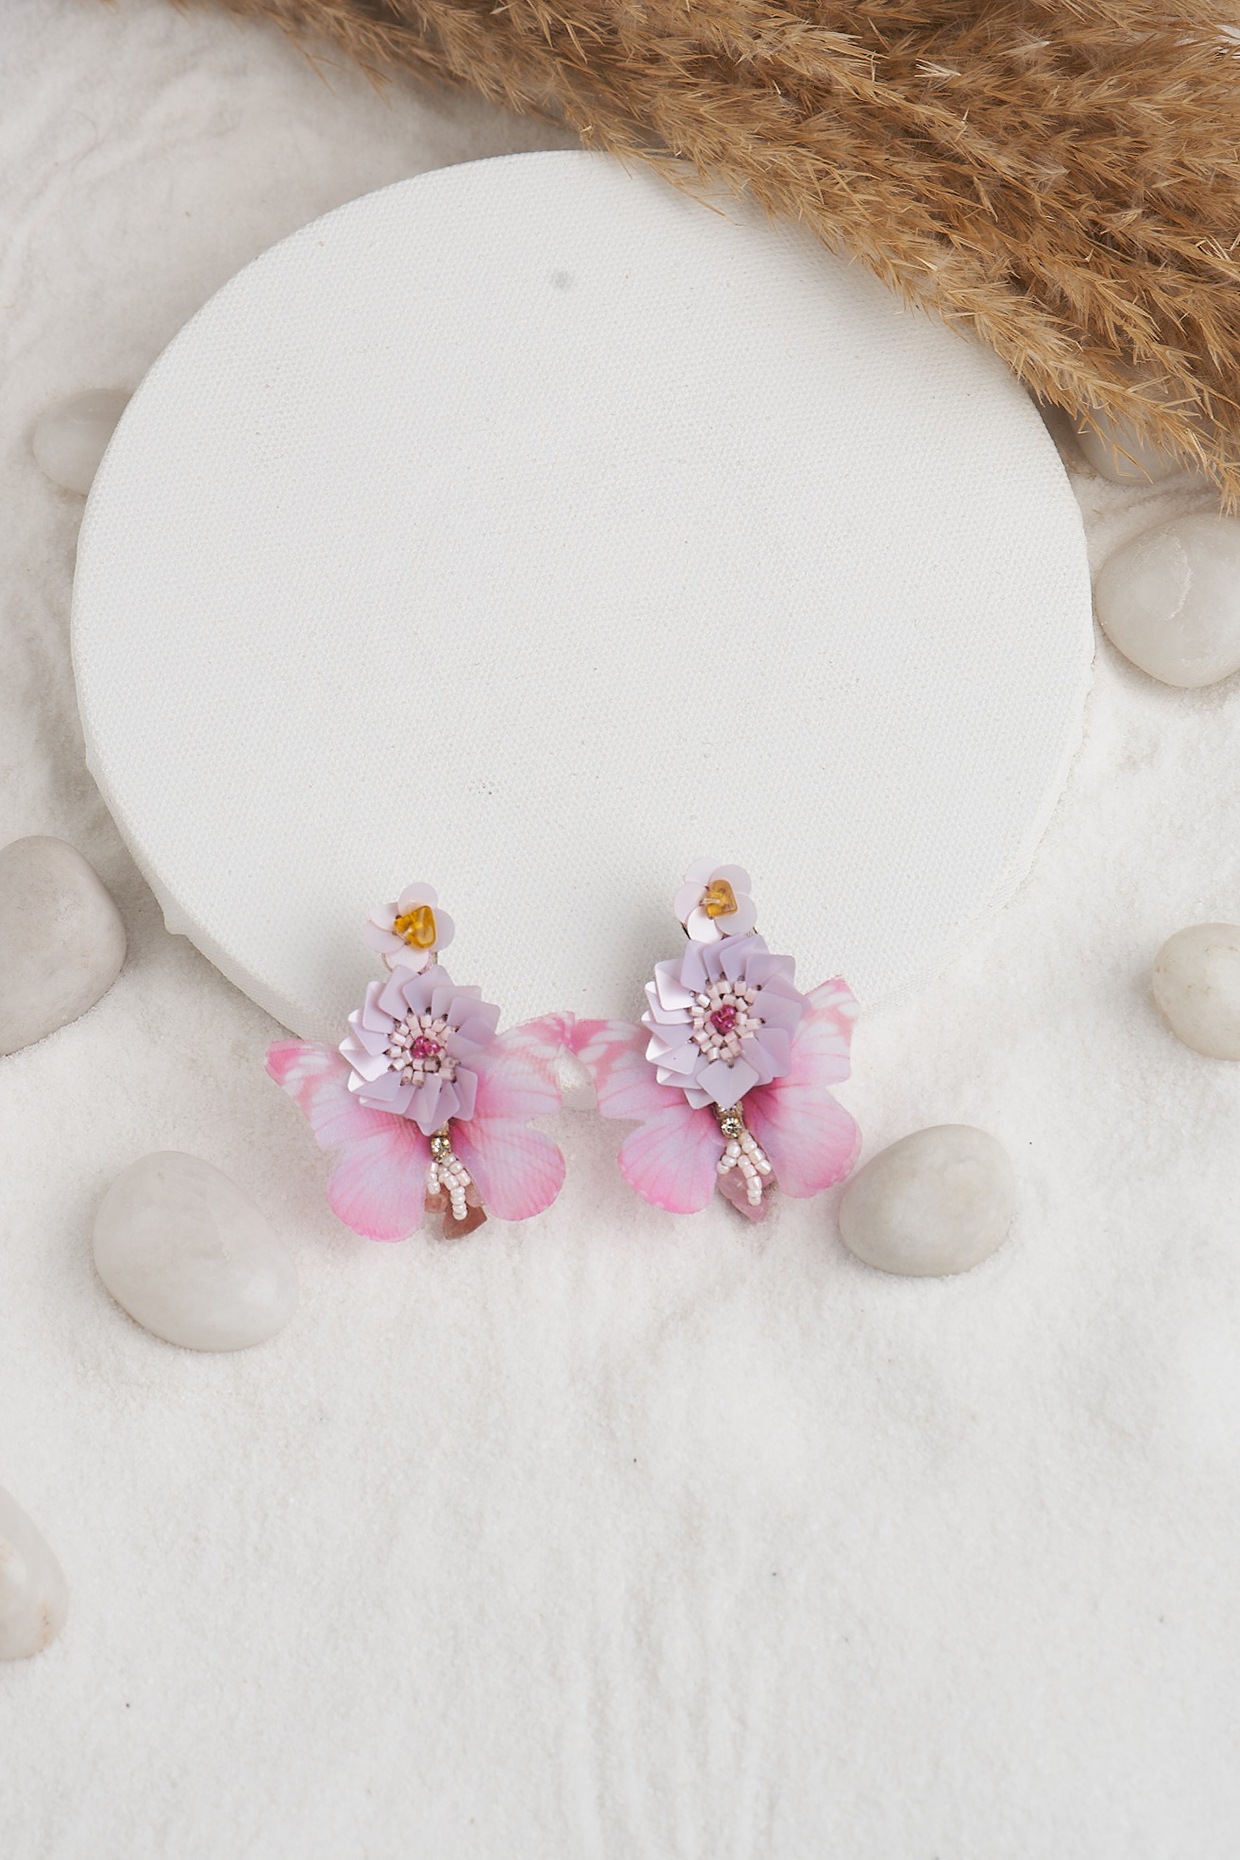 GODKI Spring Collection Purple Flowers Earrings For Women Wedding Party  Dubai Bridal Jewelry boucle d'oreille femme Gift Jewelry - AliExpress